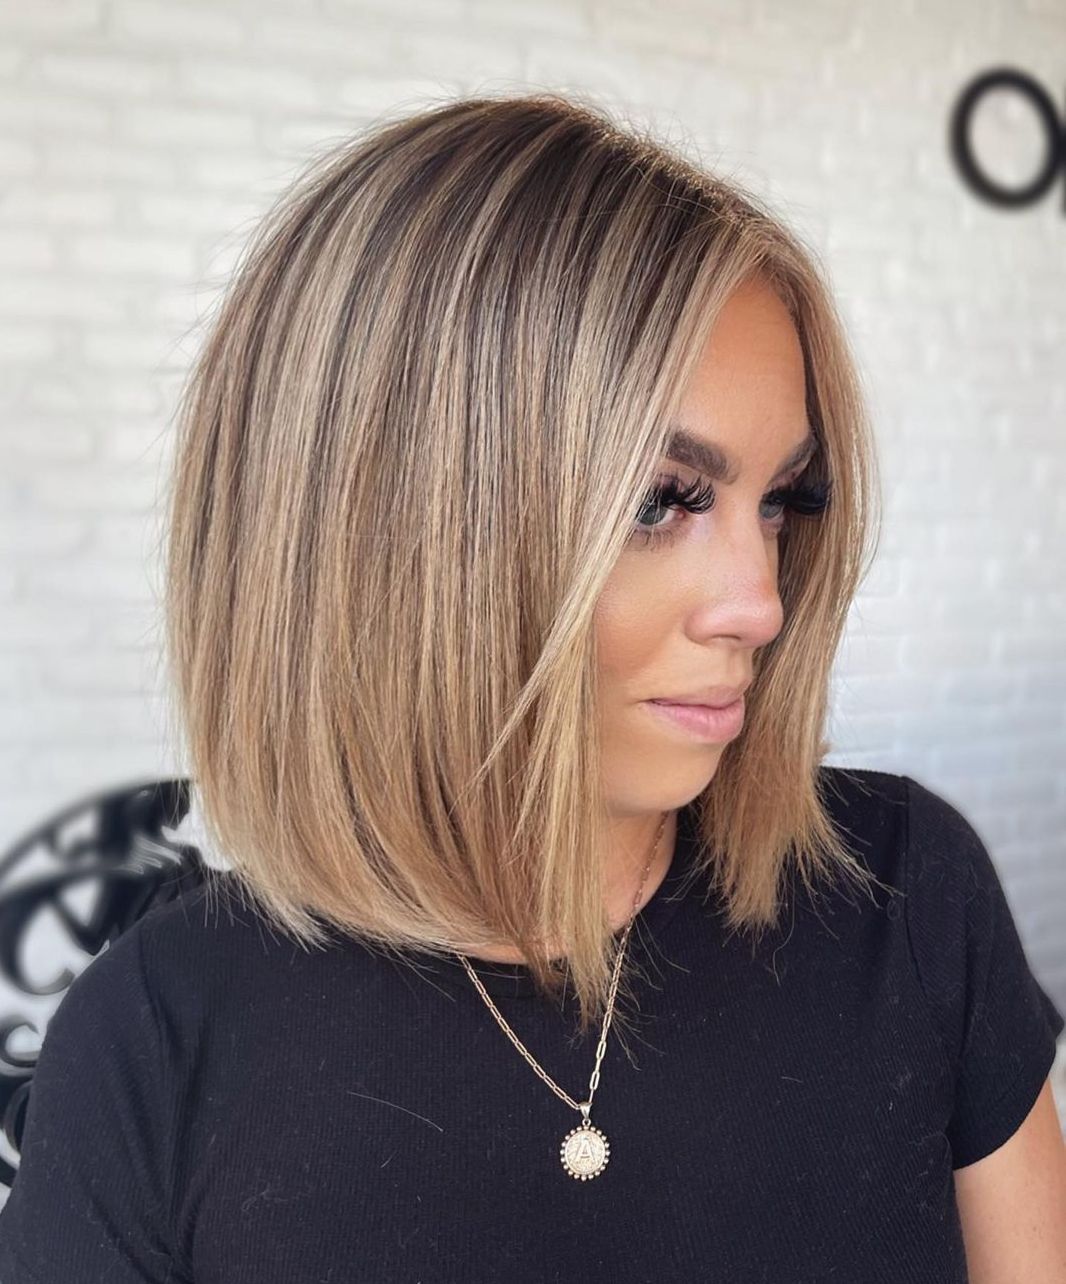 Stunning Blonde Balayage Hairstyles for a Sun-Kissed Look